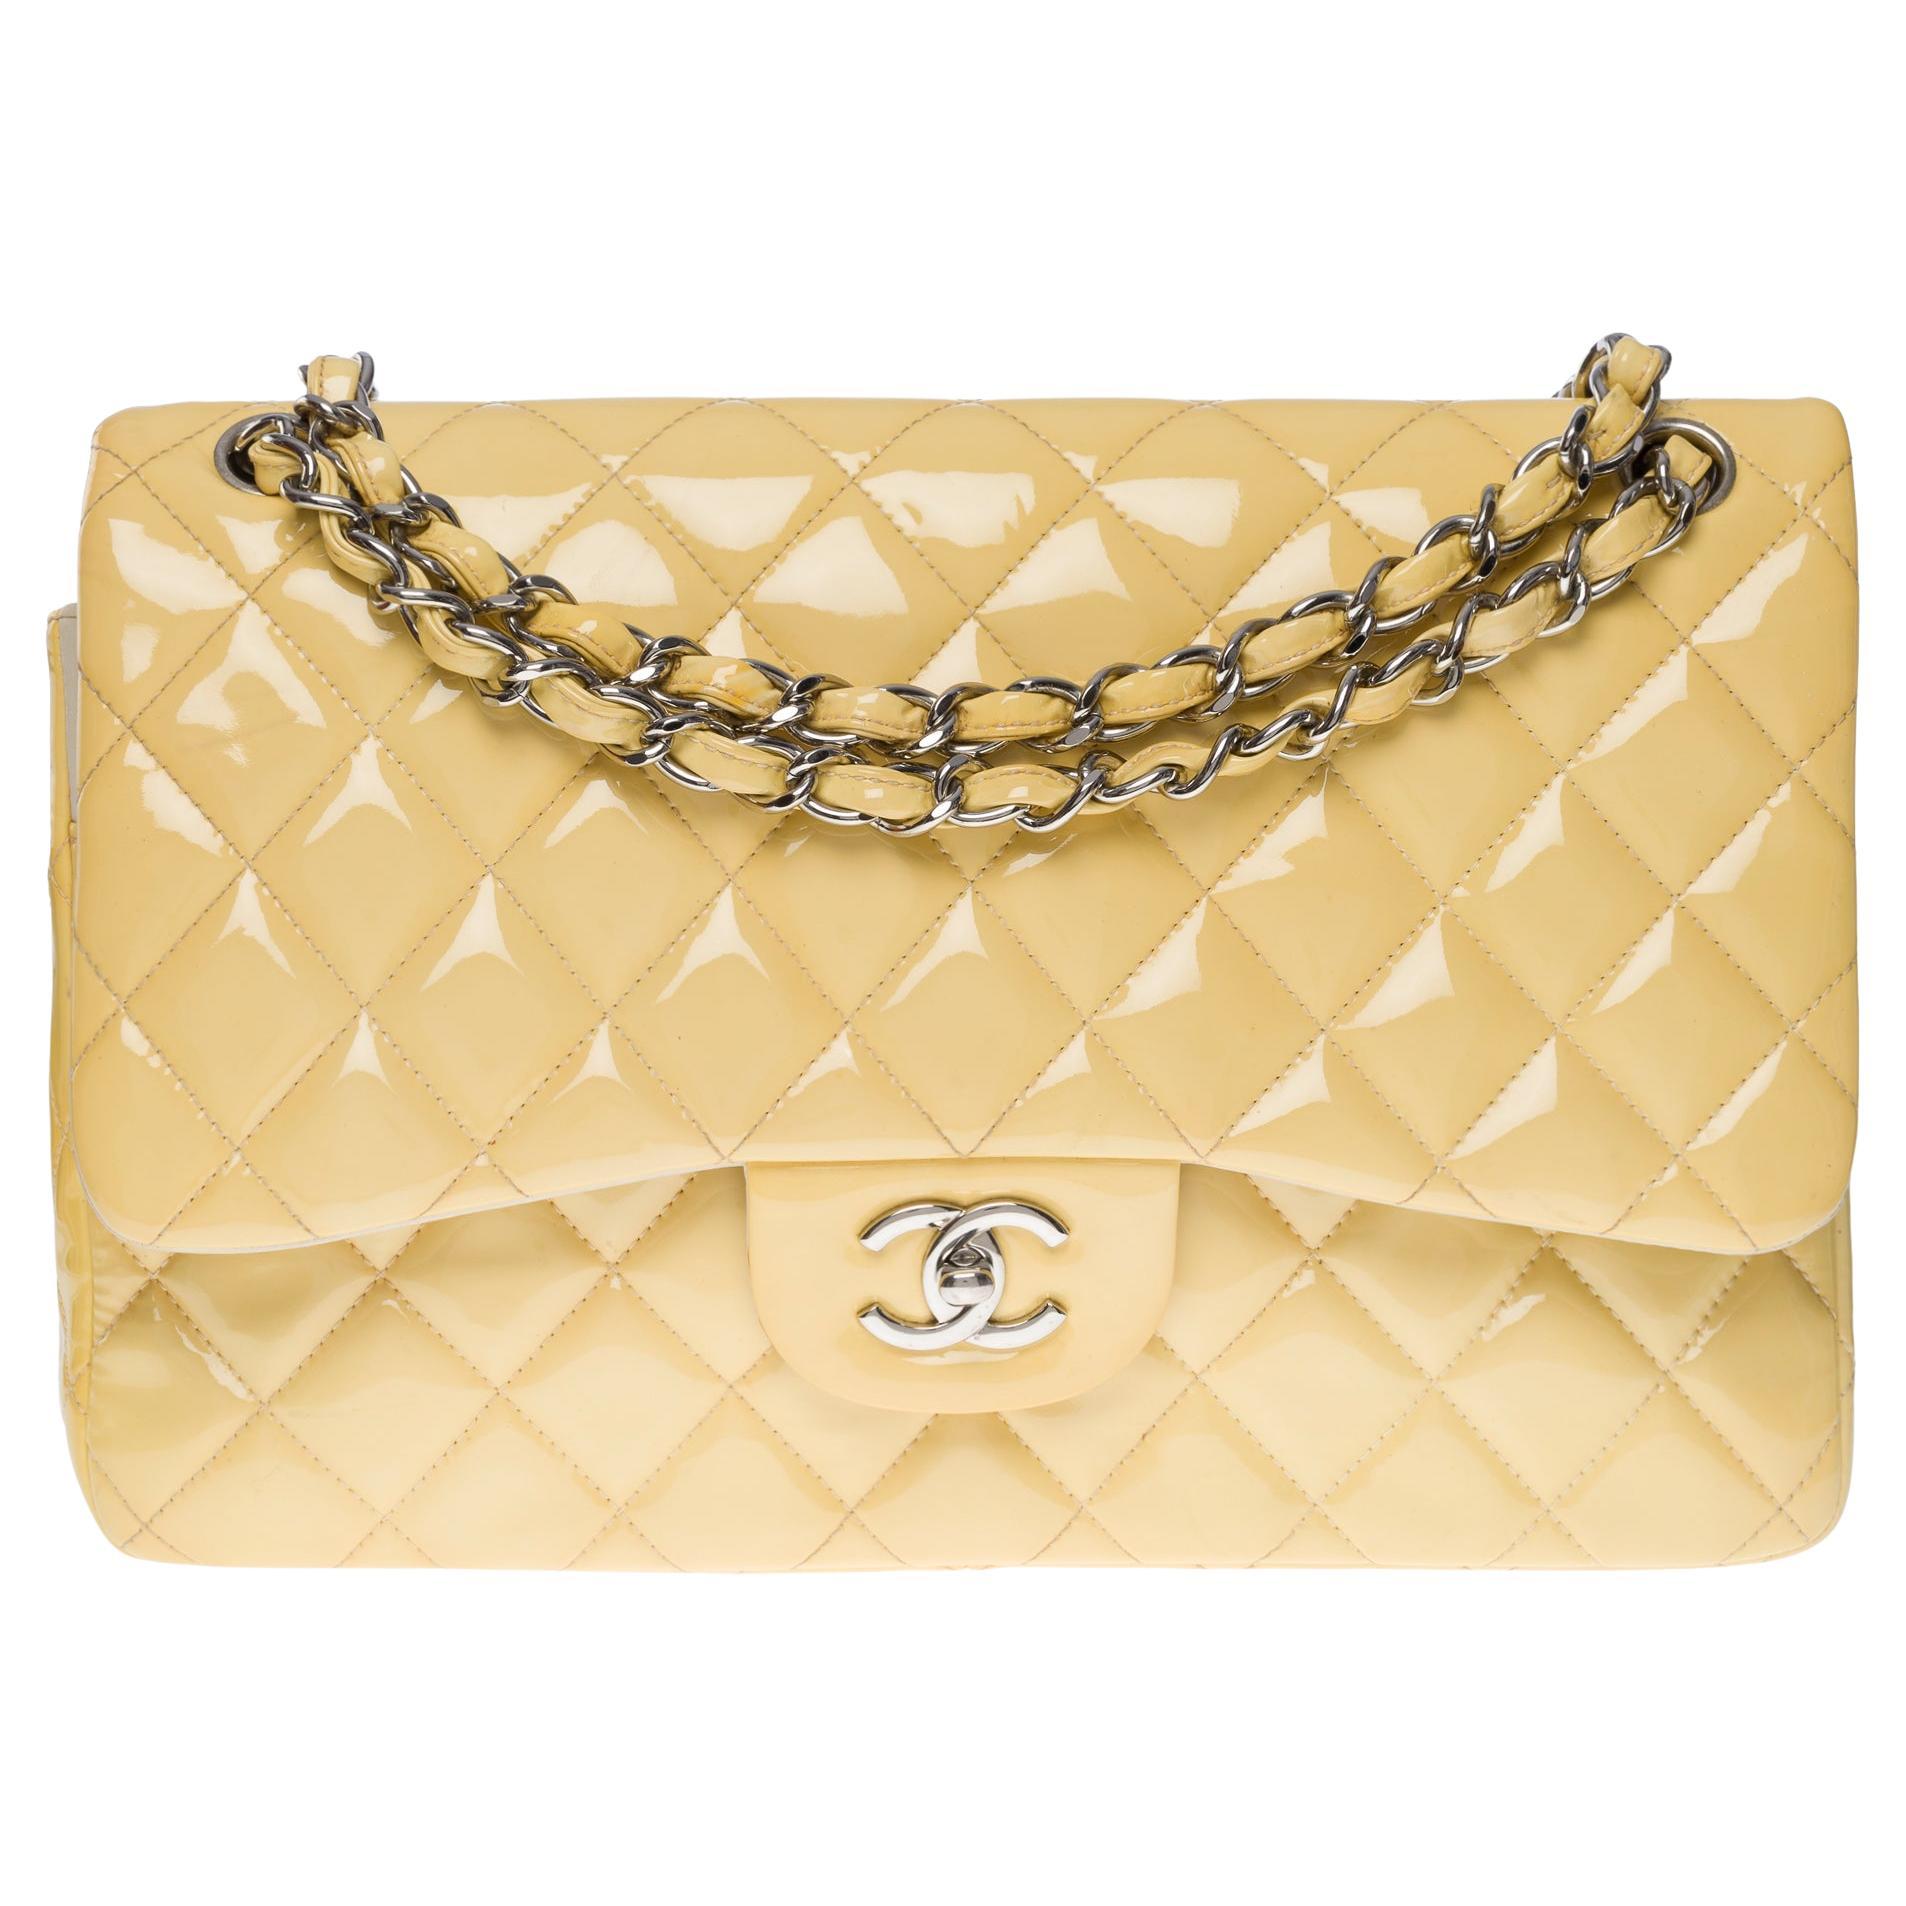 Chanel Timeless Jumbo Double Flap Shoulder Bag in Yellow Patent Leather, SHW